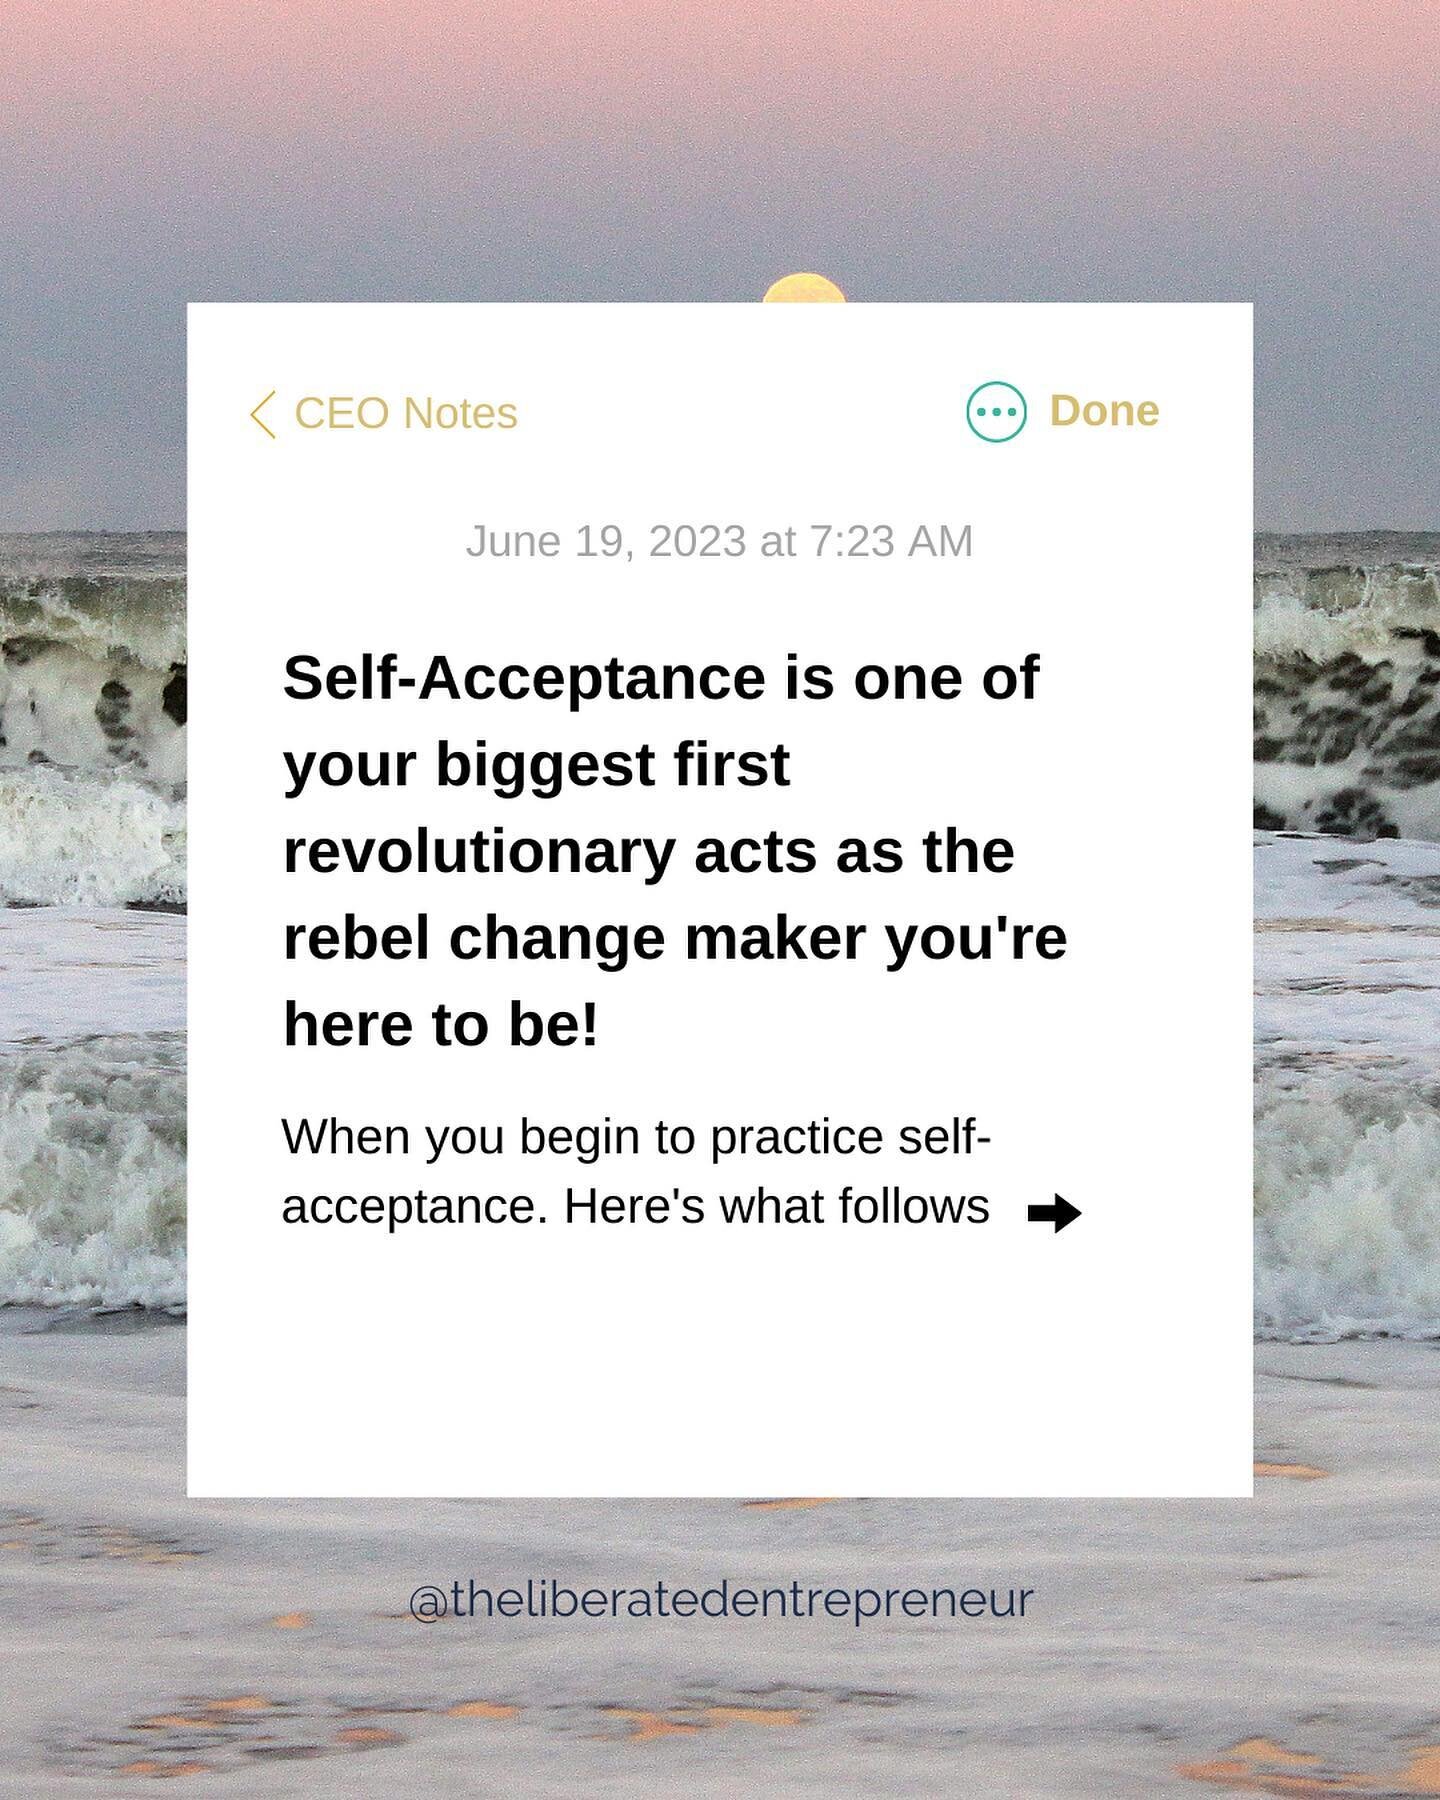 Self-Acceptance is one of your biggest first revolutionary acts as the rebel change maker you're here to be!

When you begin to practice self-acceptance. Here's what follows&quot;

🌟 You break free from the shackles of comparison and self-doubt. 
🌟